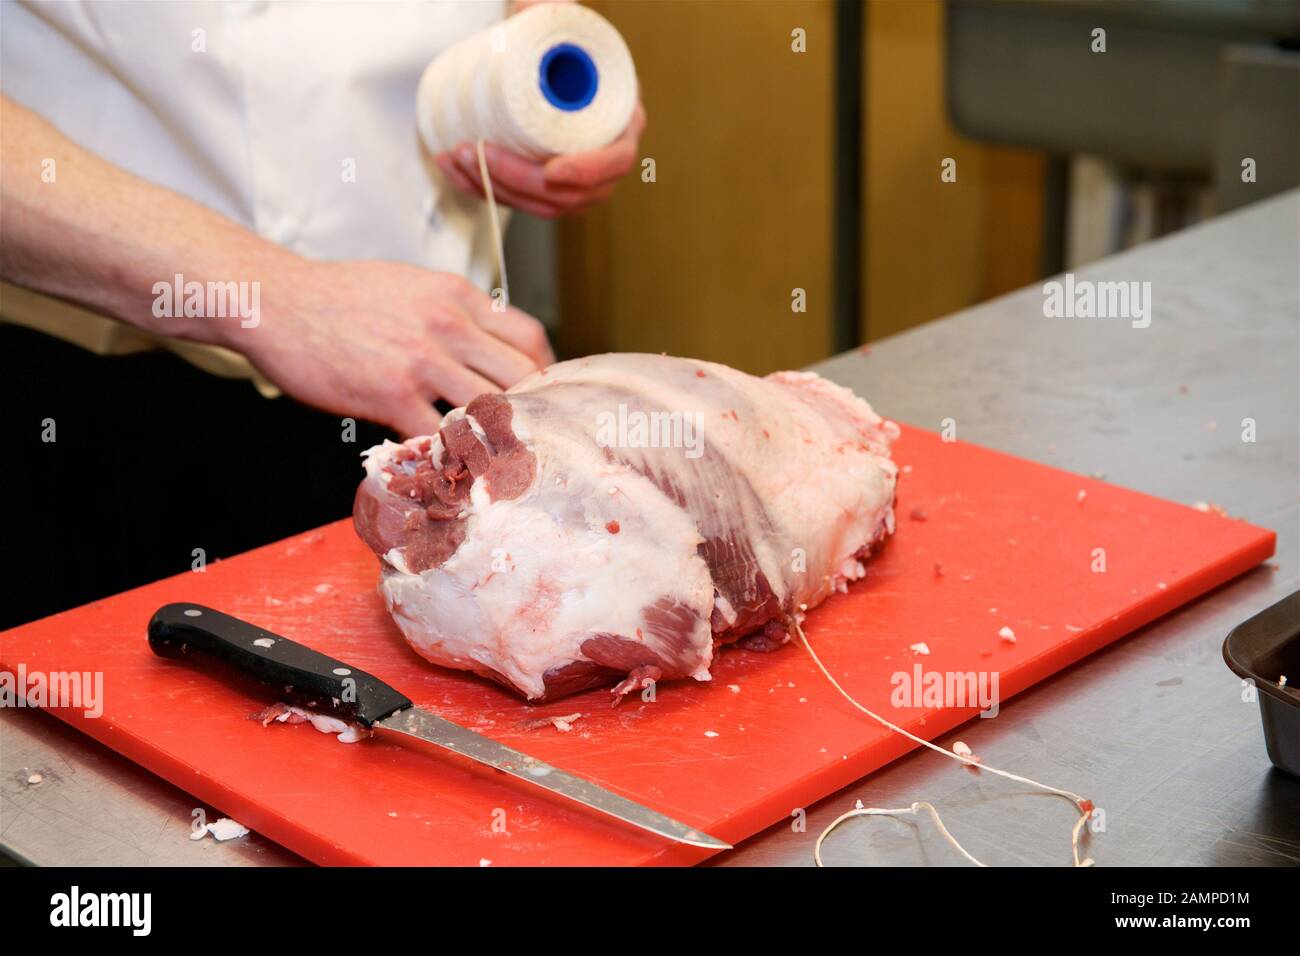 Restaurant chef preparing a joint of beef. Stock Photo